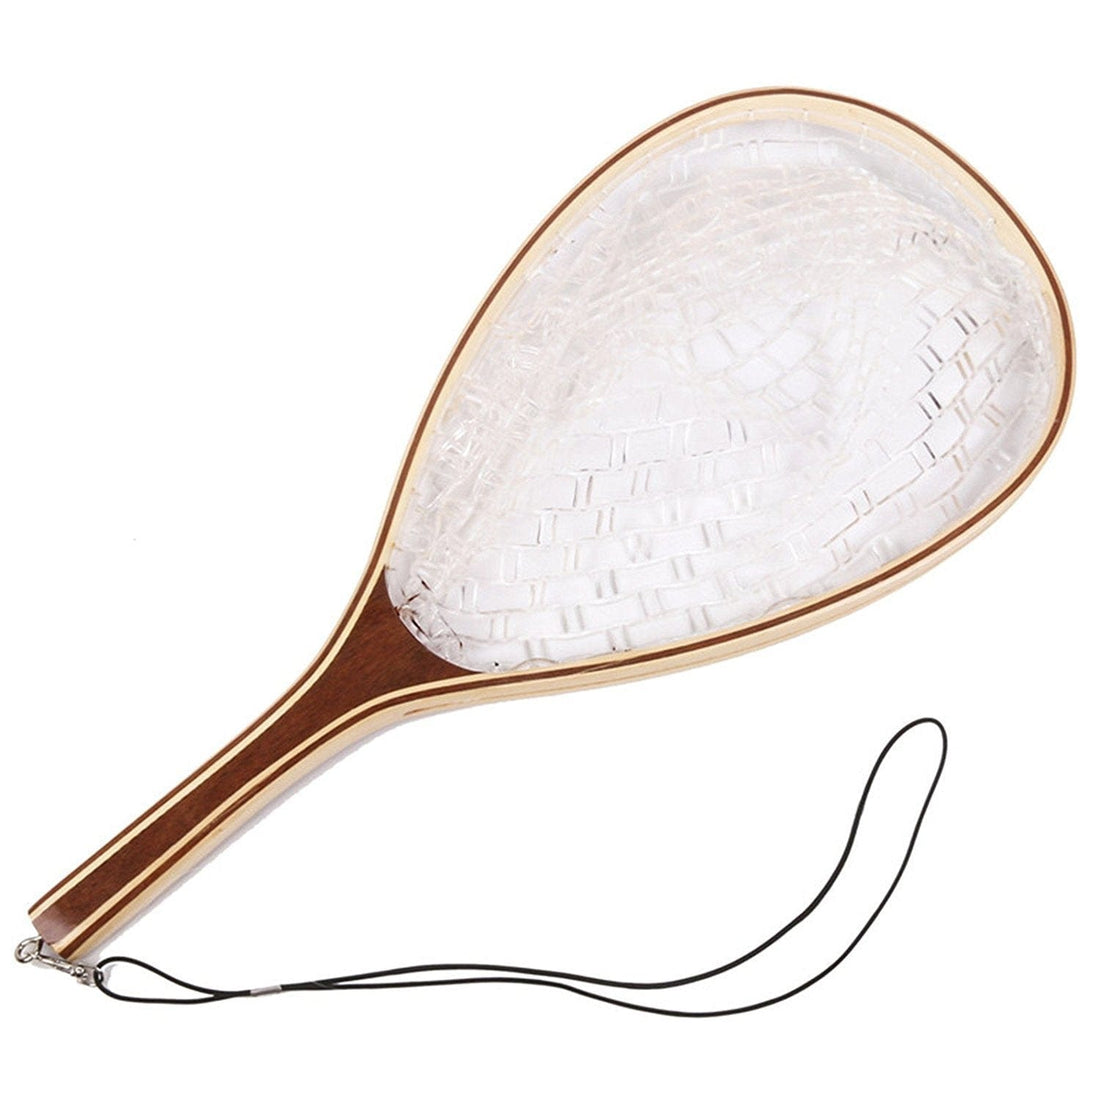 Fly Fishing Soft Rubber Net, Wooden Handle for Catch & Release